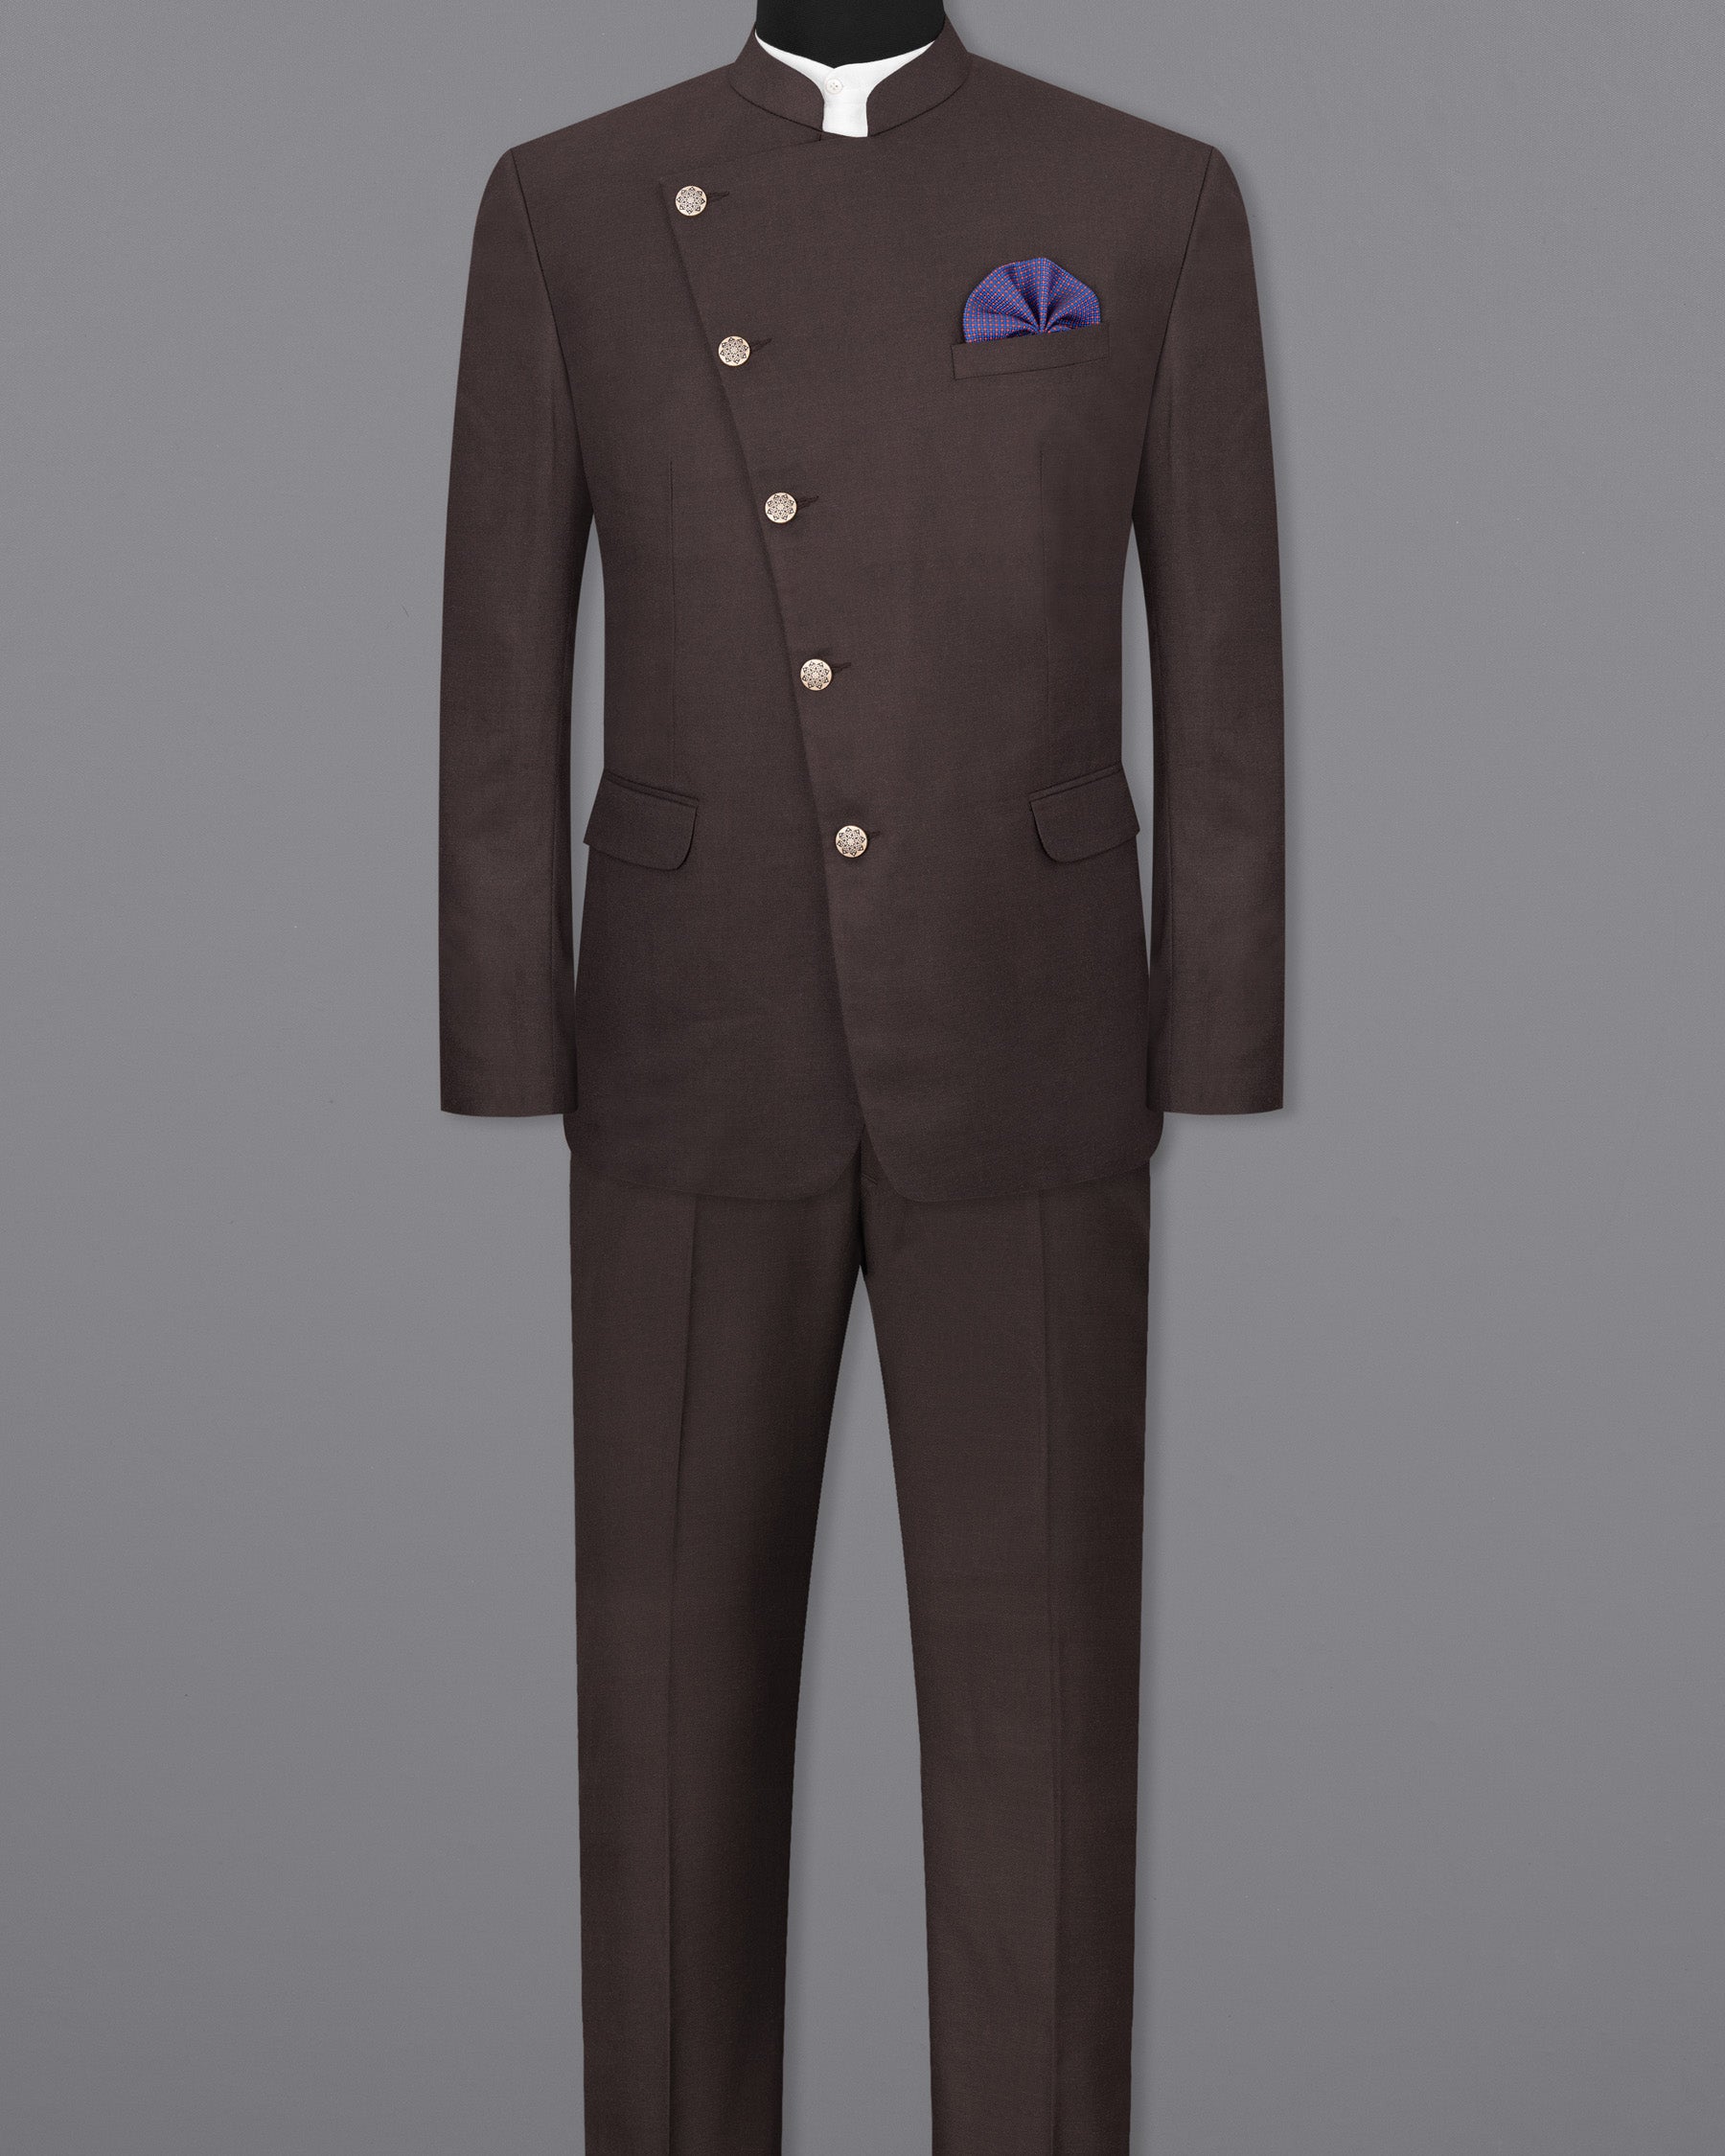 Piano Brown Cross Buttoned Bandhgala Suit ST1829-CBG-36, ST1829-CBG-38, ST1829-CBG-40, ST1829-CBG-42, ST1829-CBG-44, ST1829-CBG-46, ST1829-CBG-48, ST1829-CBG-50, ST1829-CBG-52, ST1829-CBG-54, ST1829-CBG-56, ST1829-CBG-58, ST1829-CBG-60